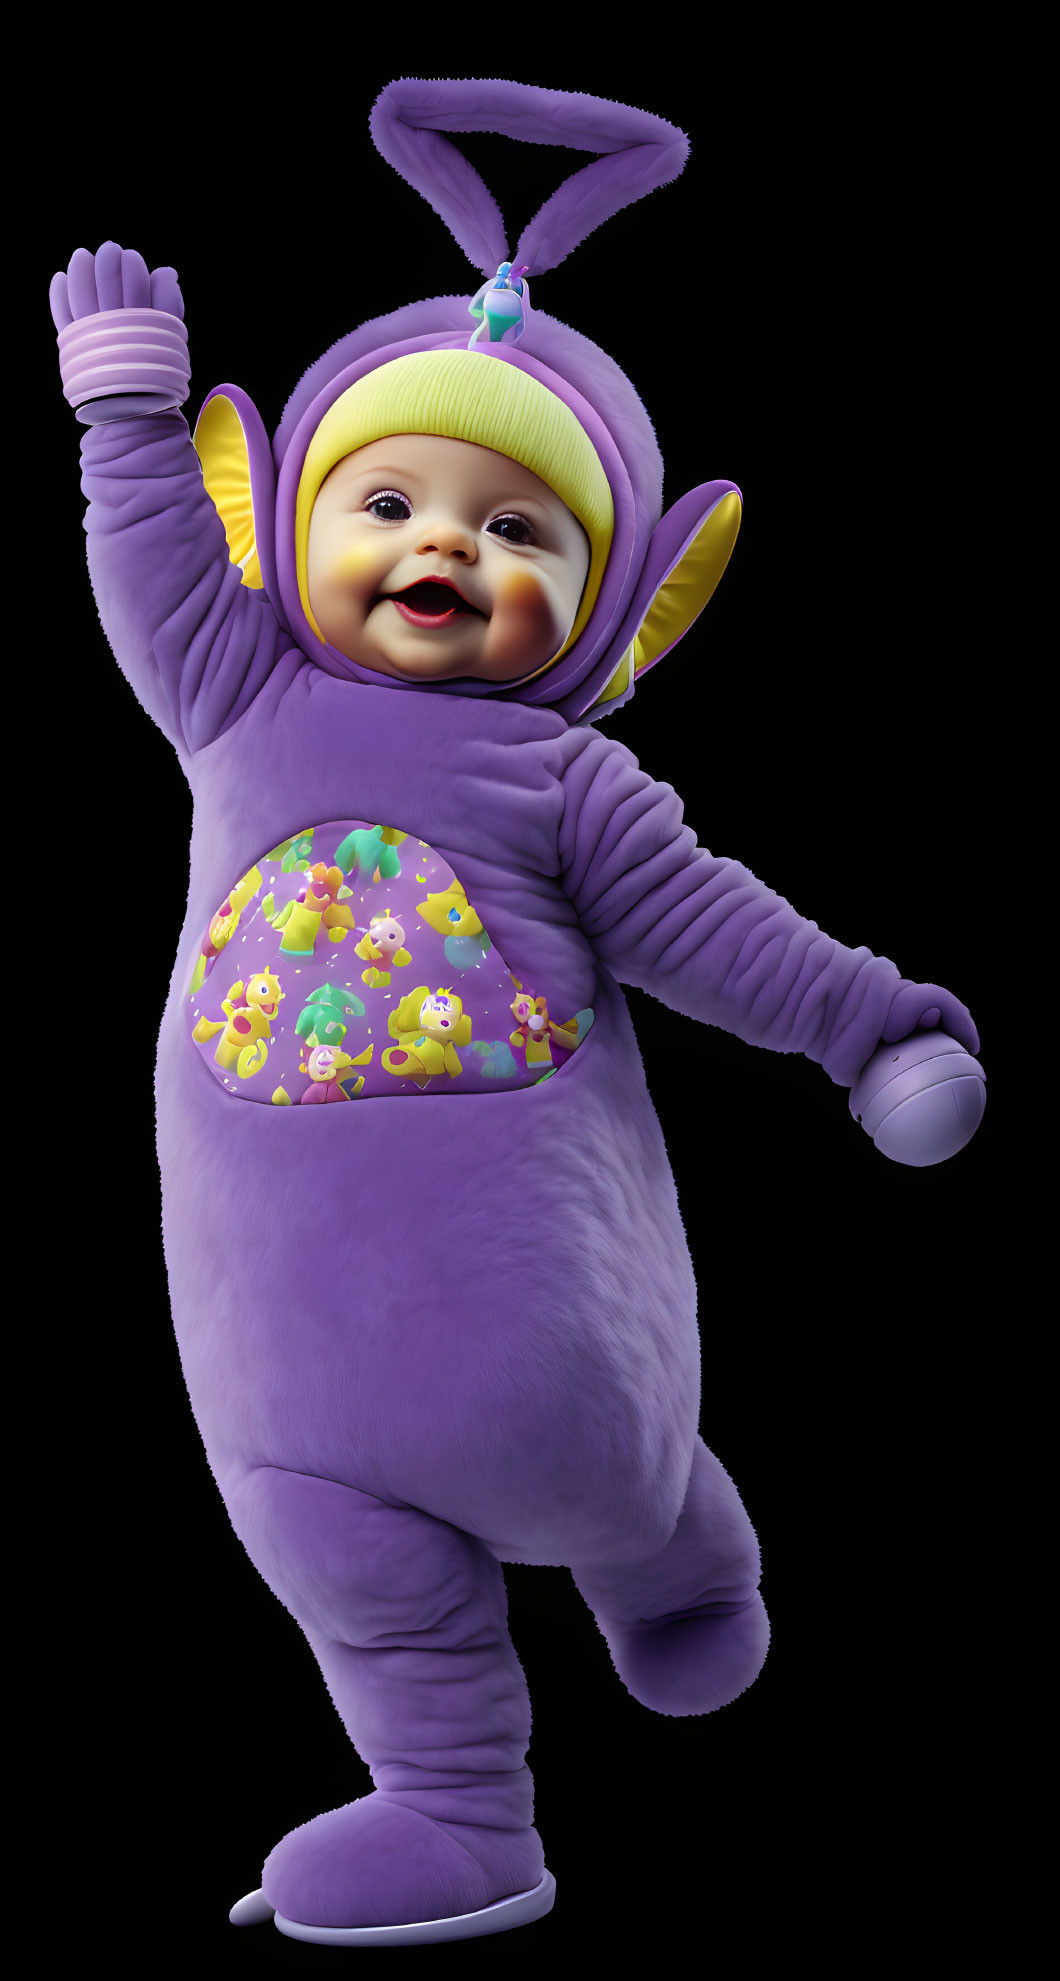 Teletubbies are the BEST!!!